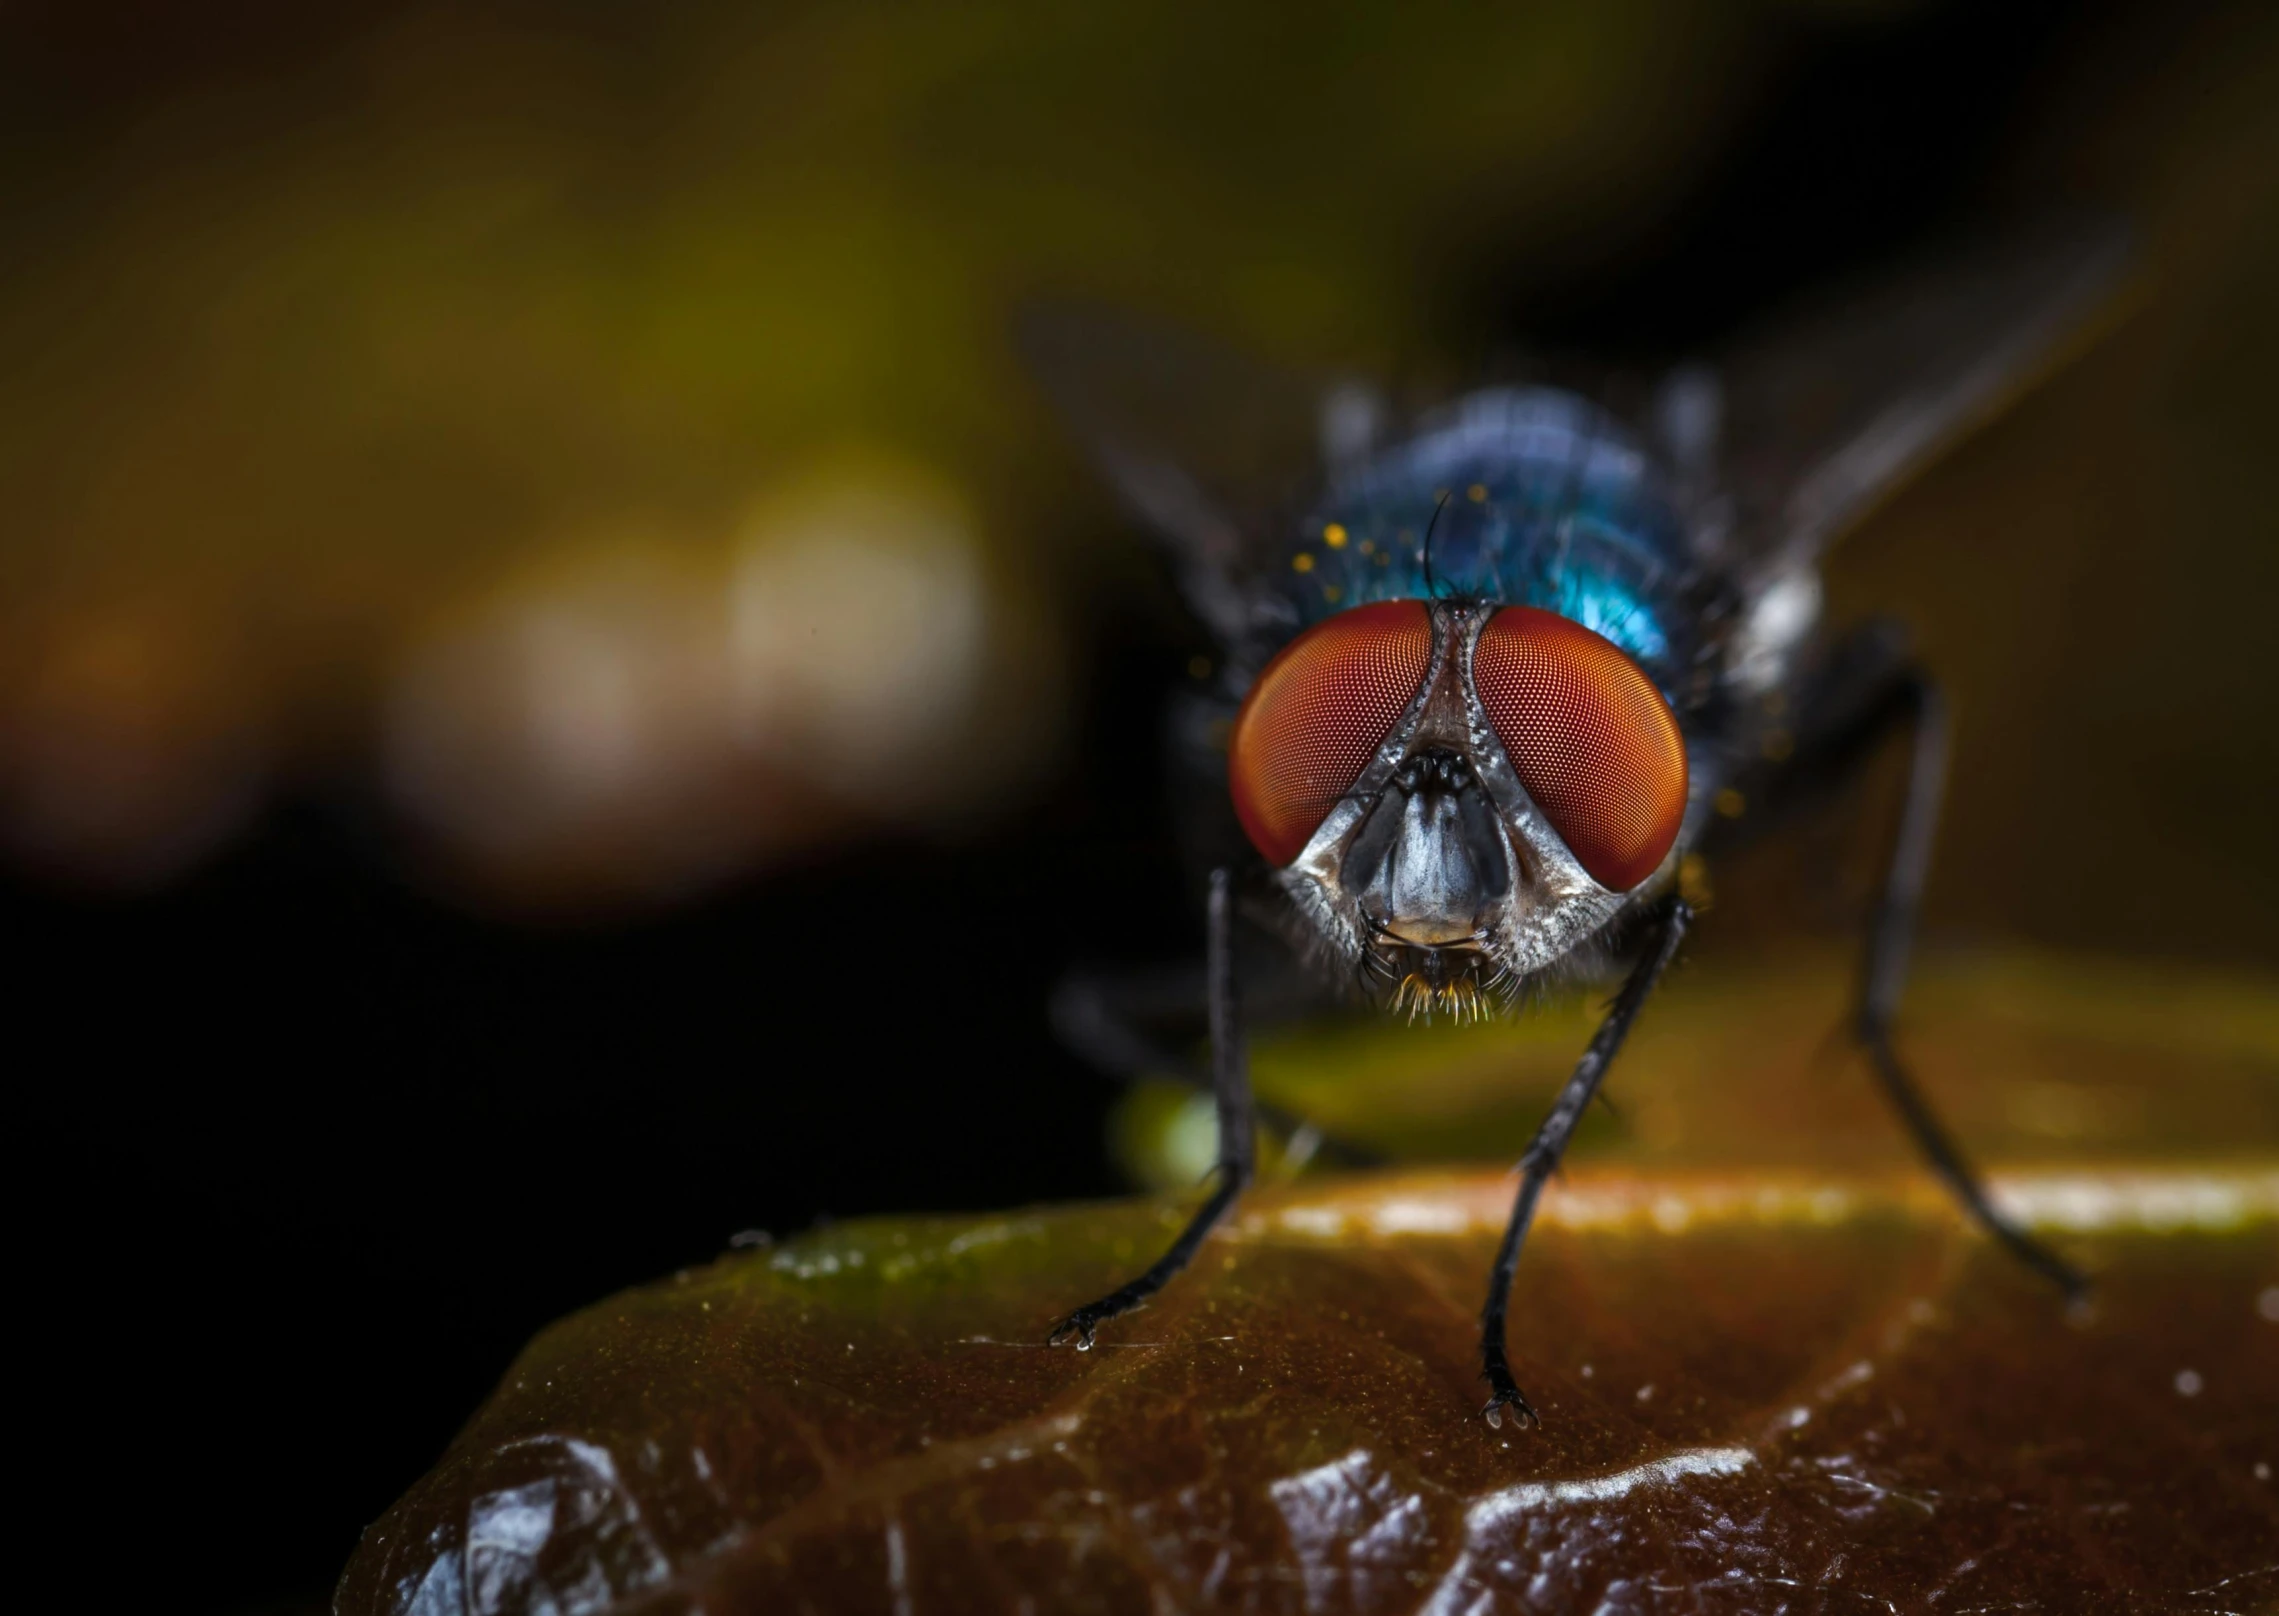 a close up of a fly on a leaf, pexels contest winner, hurufiyya, avatar image, red eyed, curious expression, male with halo